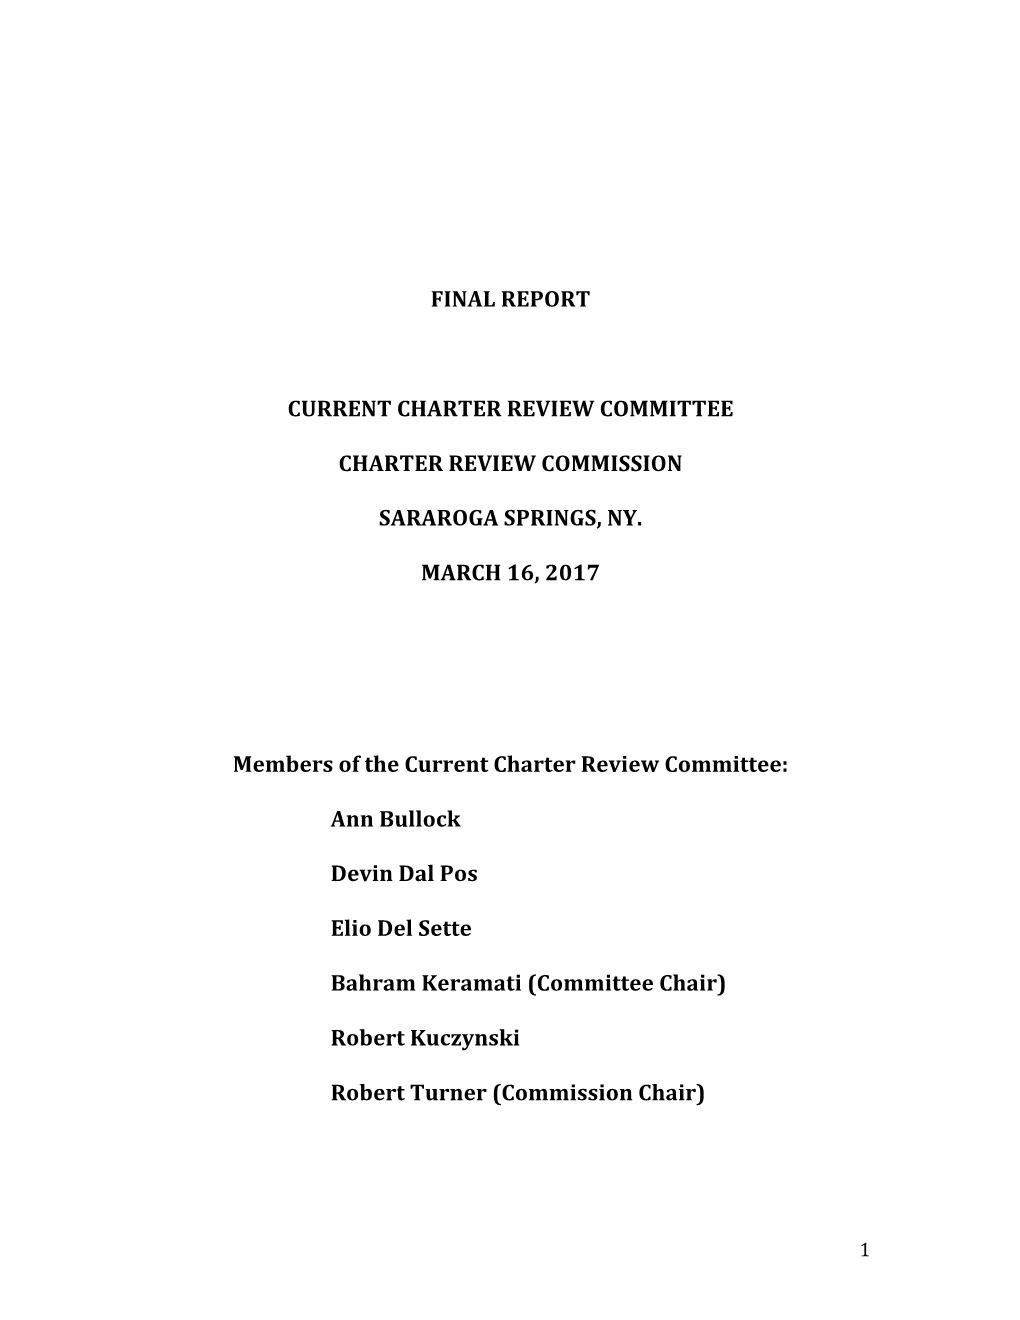 Final Report Current Charter Review Committee